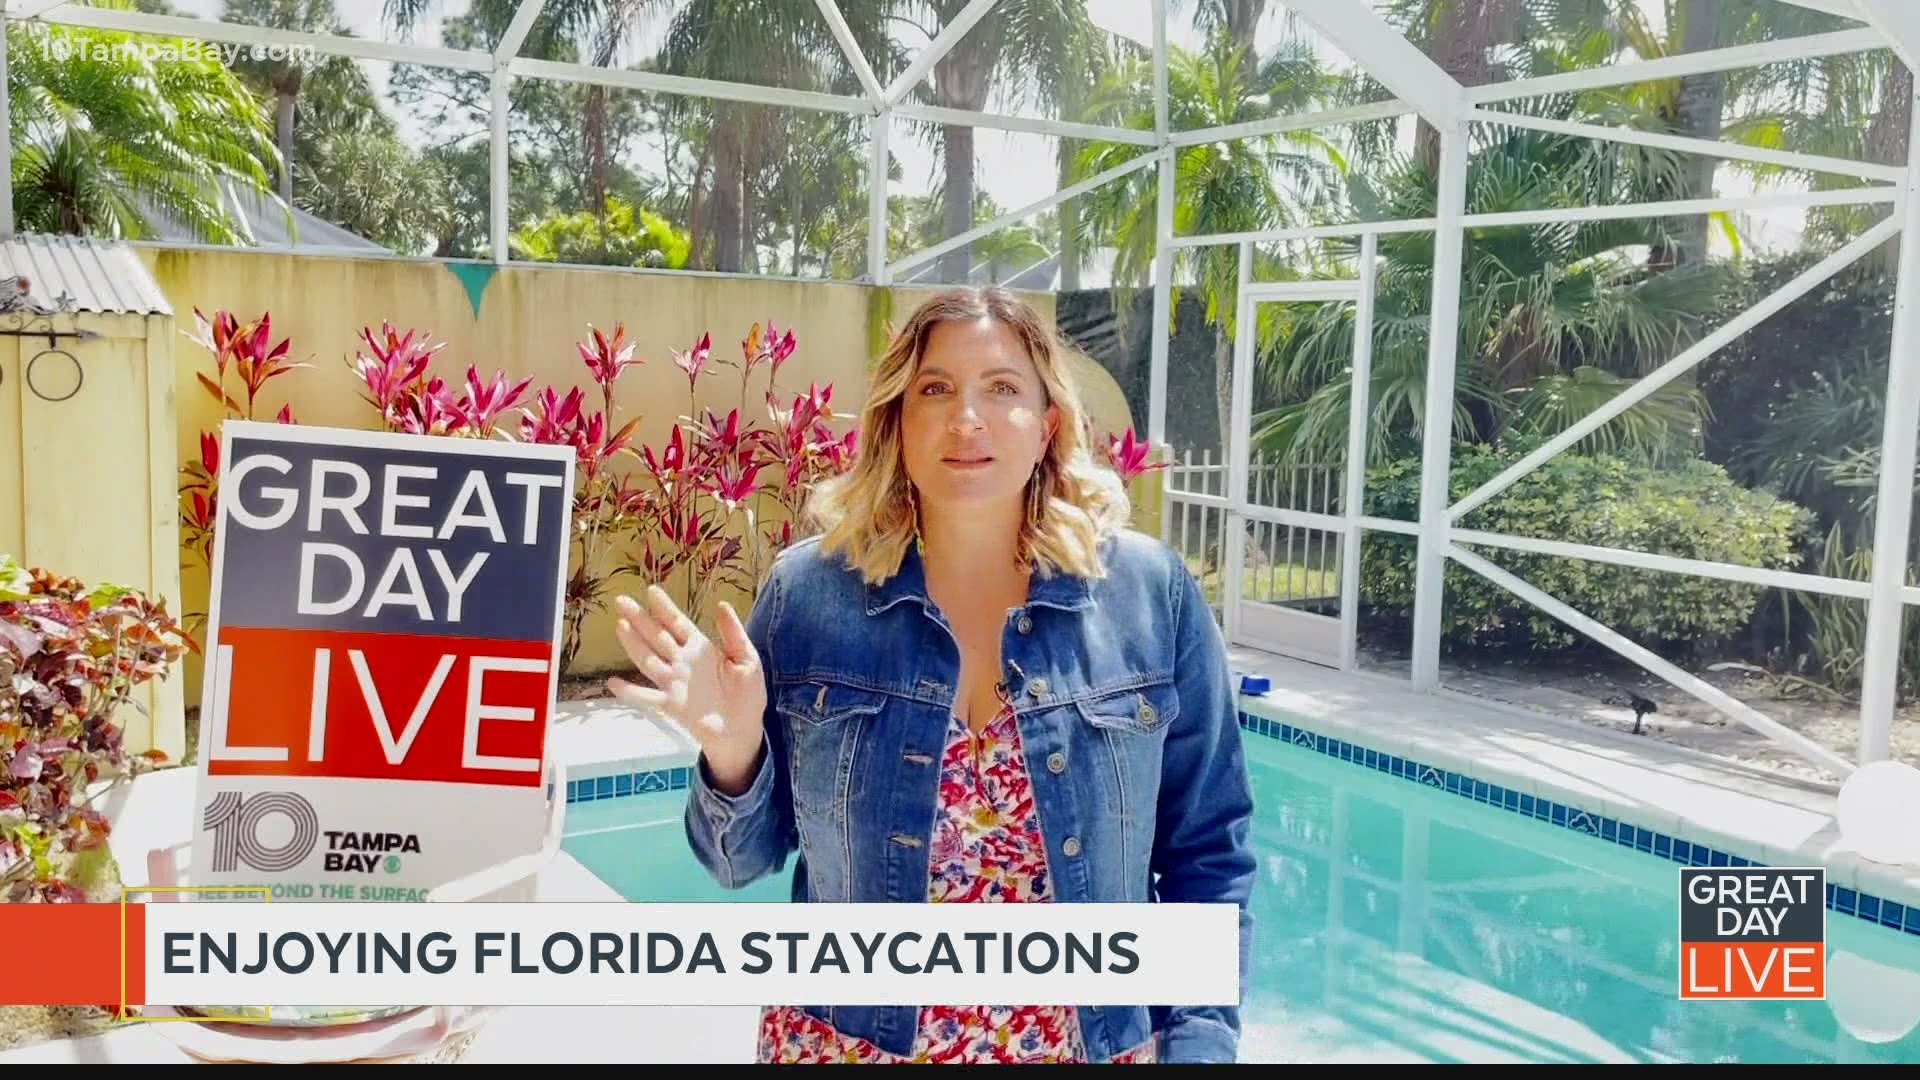 Local FL staycation hotels worth a visit